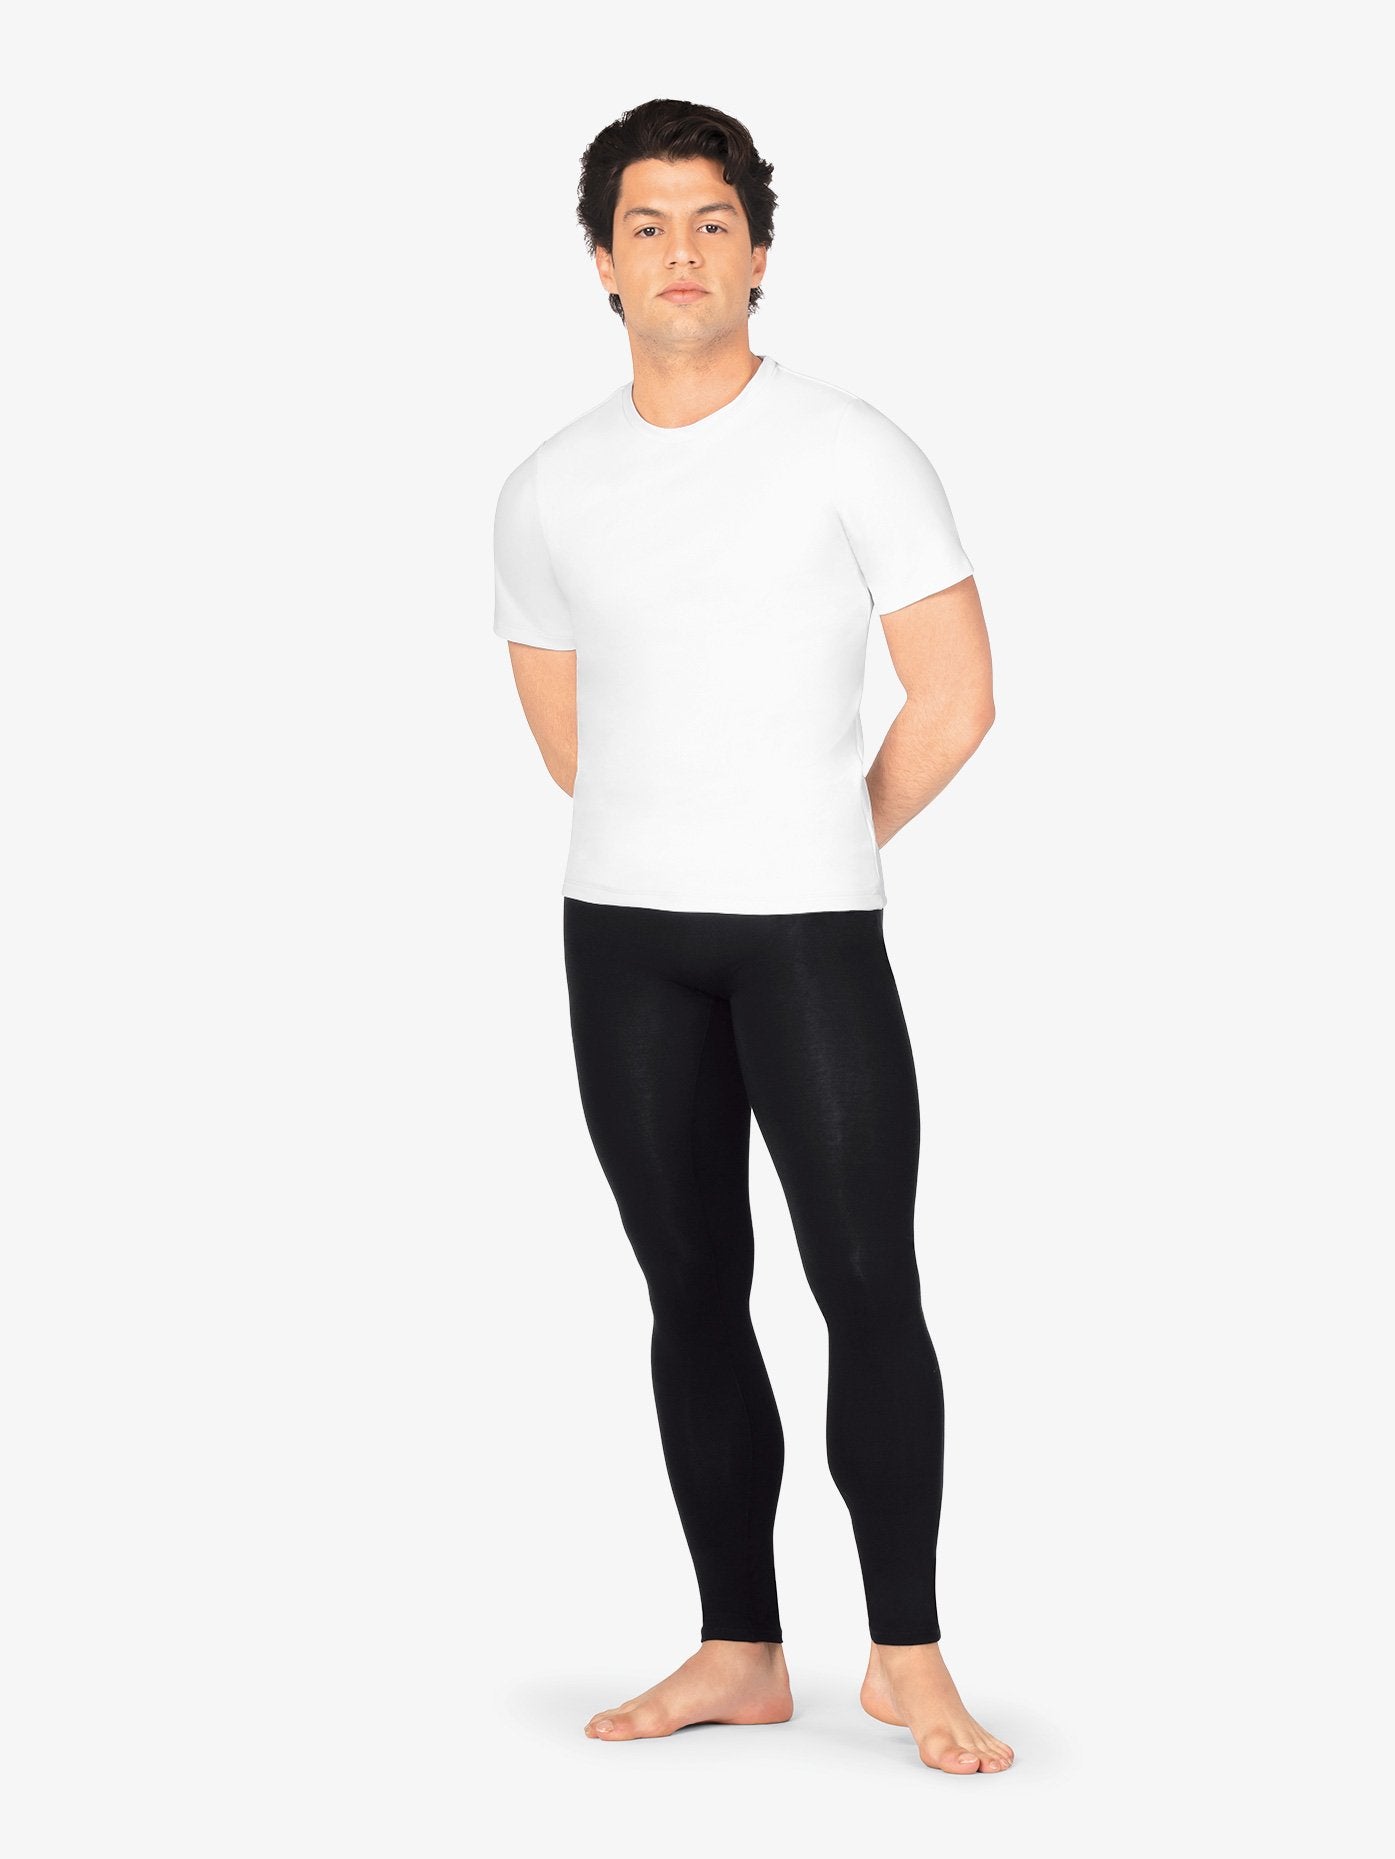 Men's seamless front bamboo compression black leggings